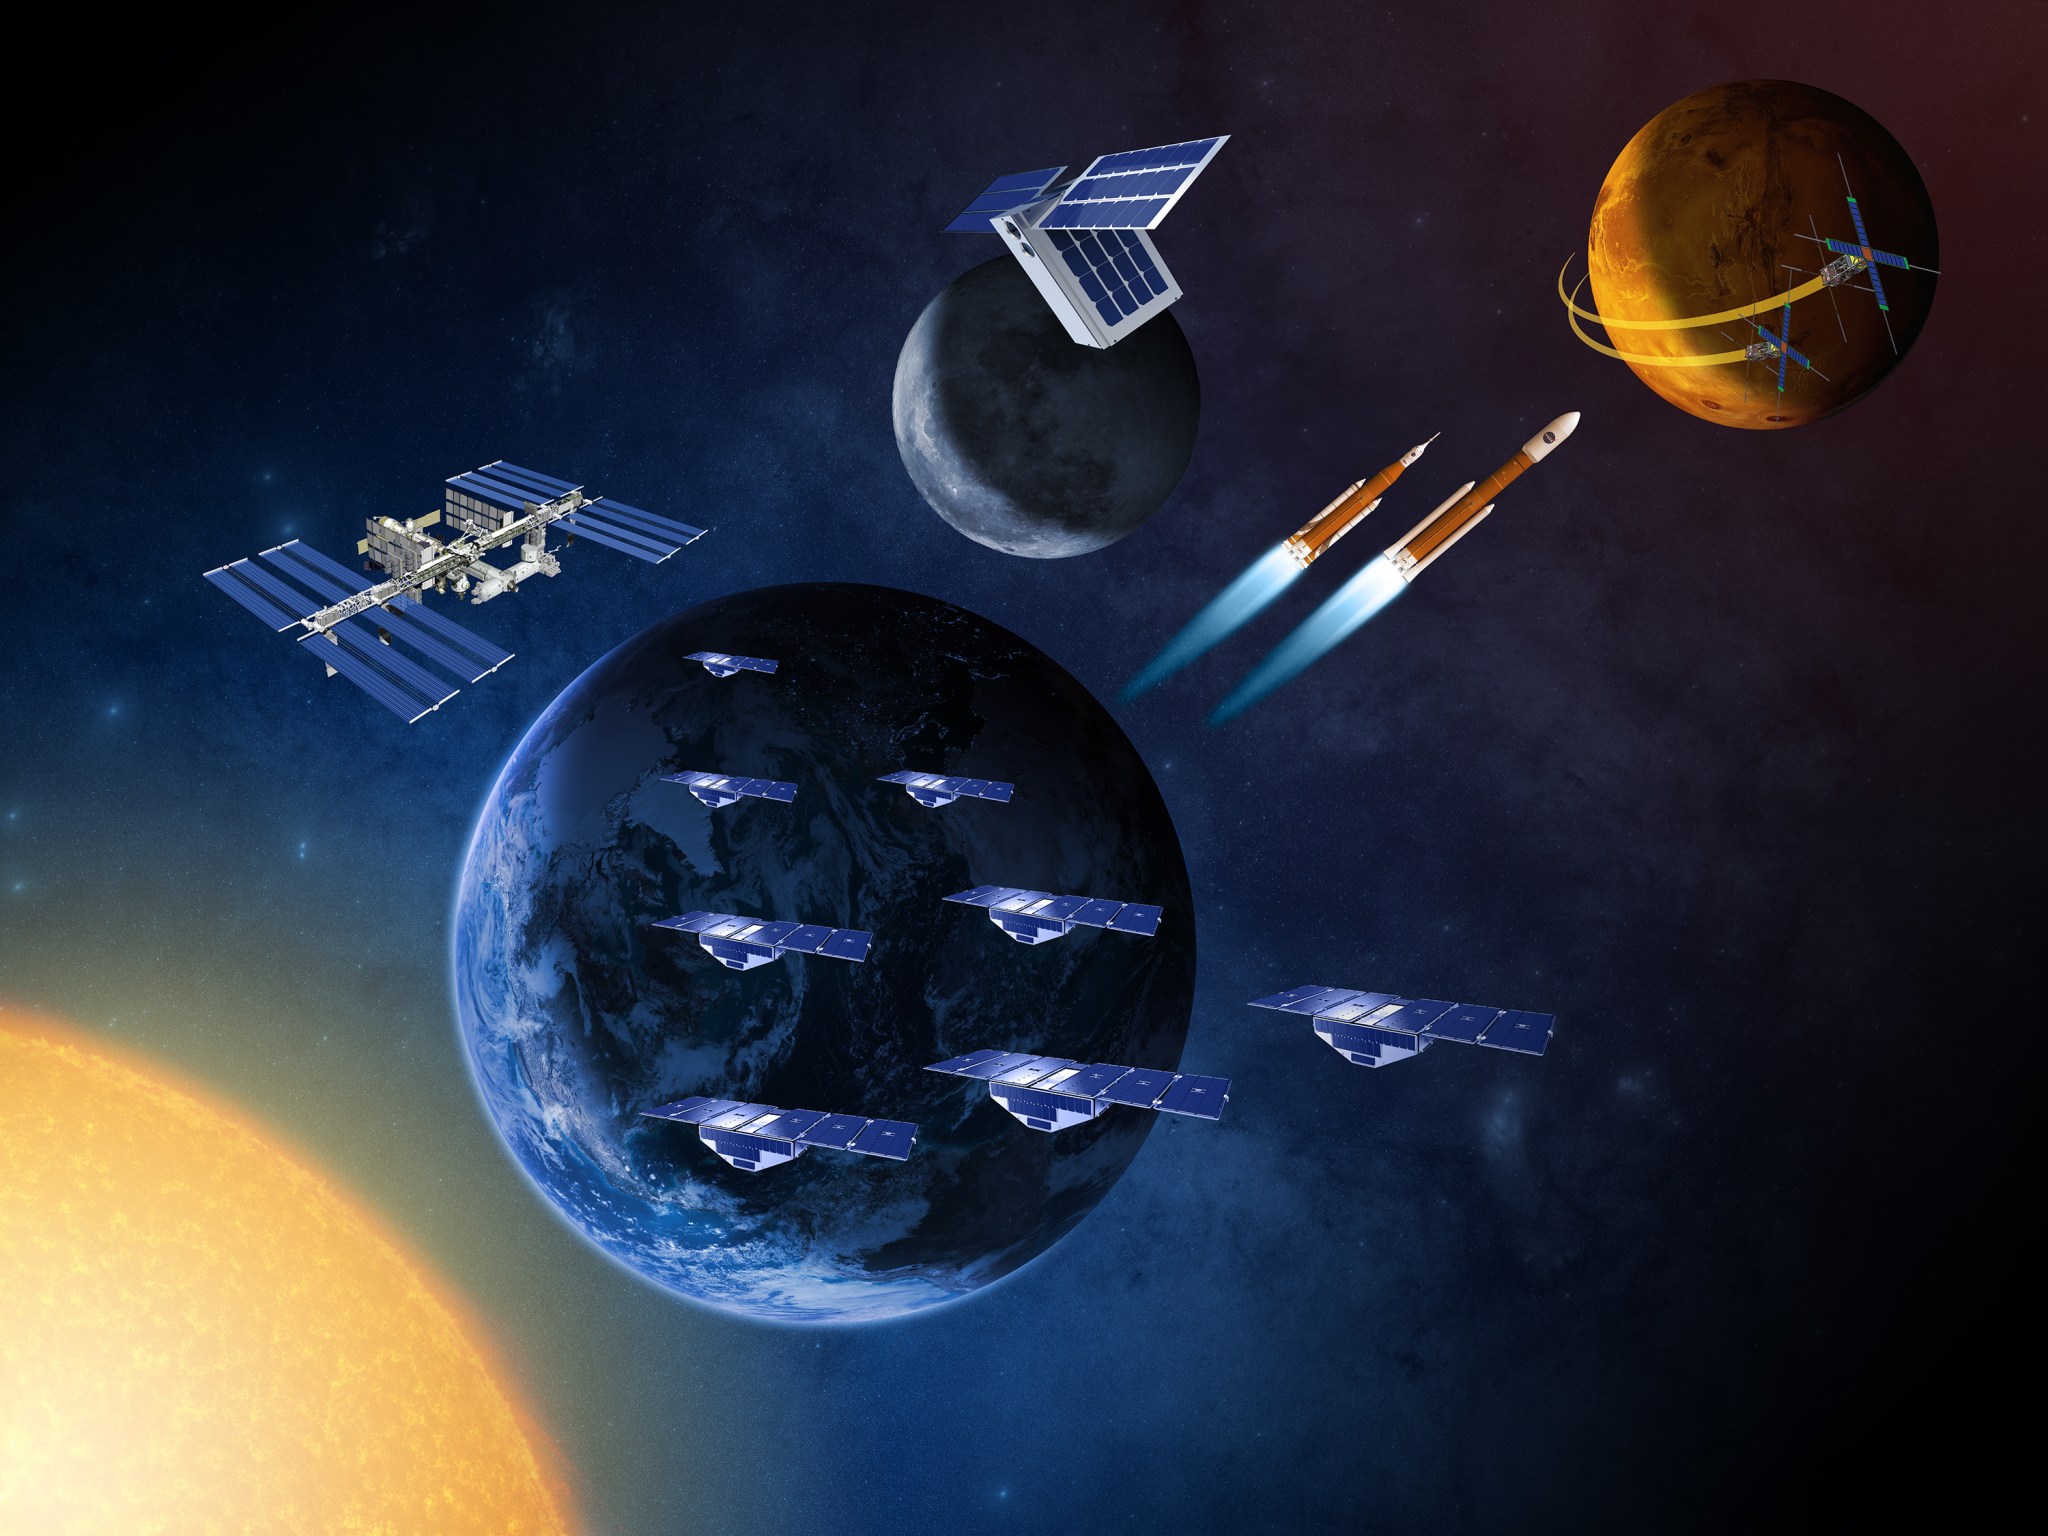 Small spacecraft and satellites are helping NASA advance scientific and human exploration.